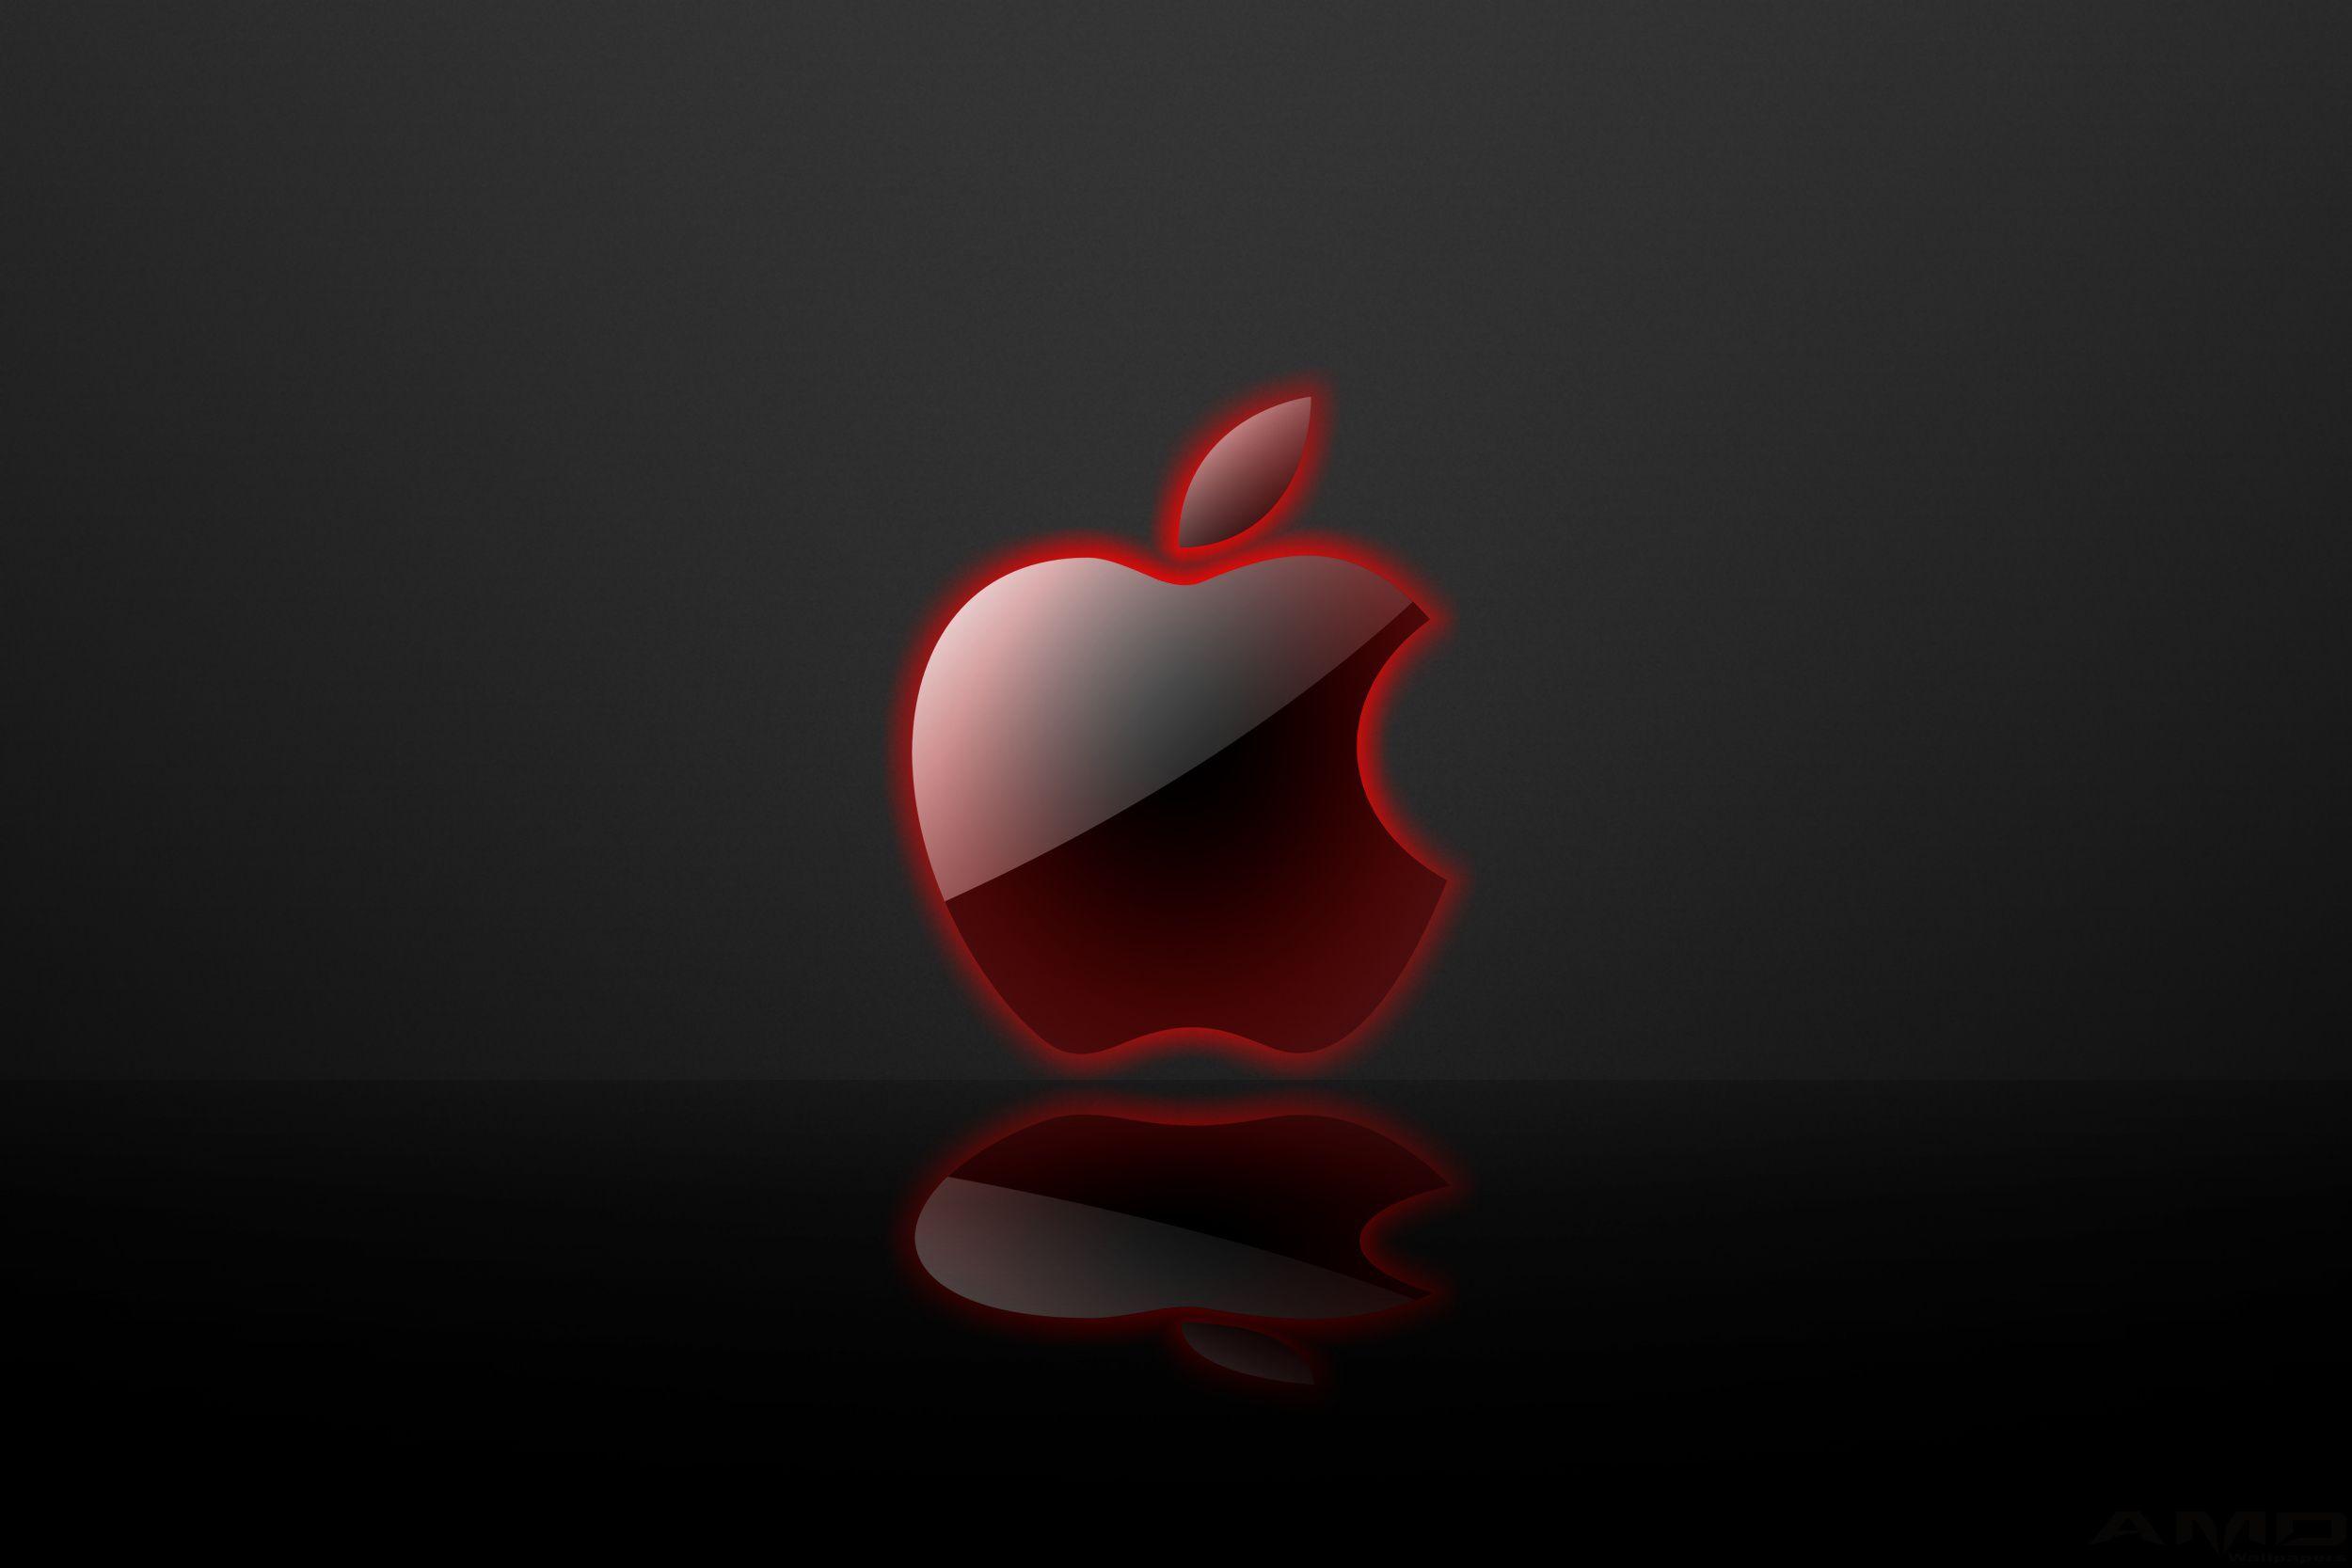 Red Apple Logo - Red Apple Logo Wallpapers - Wallpaper Cave